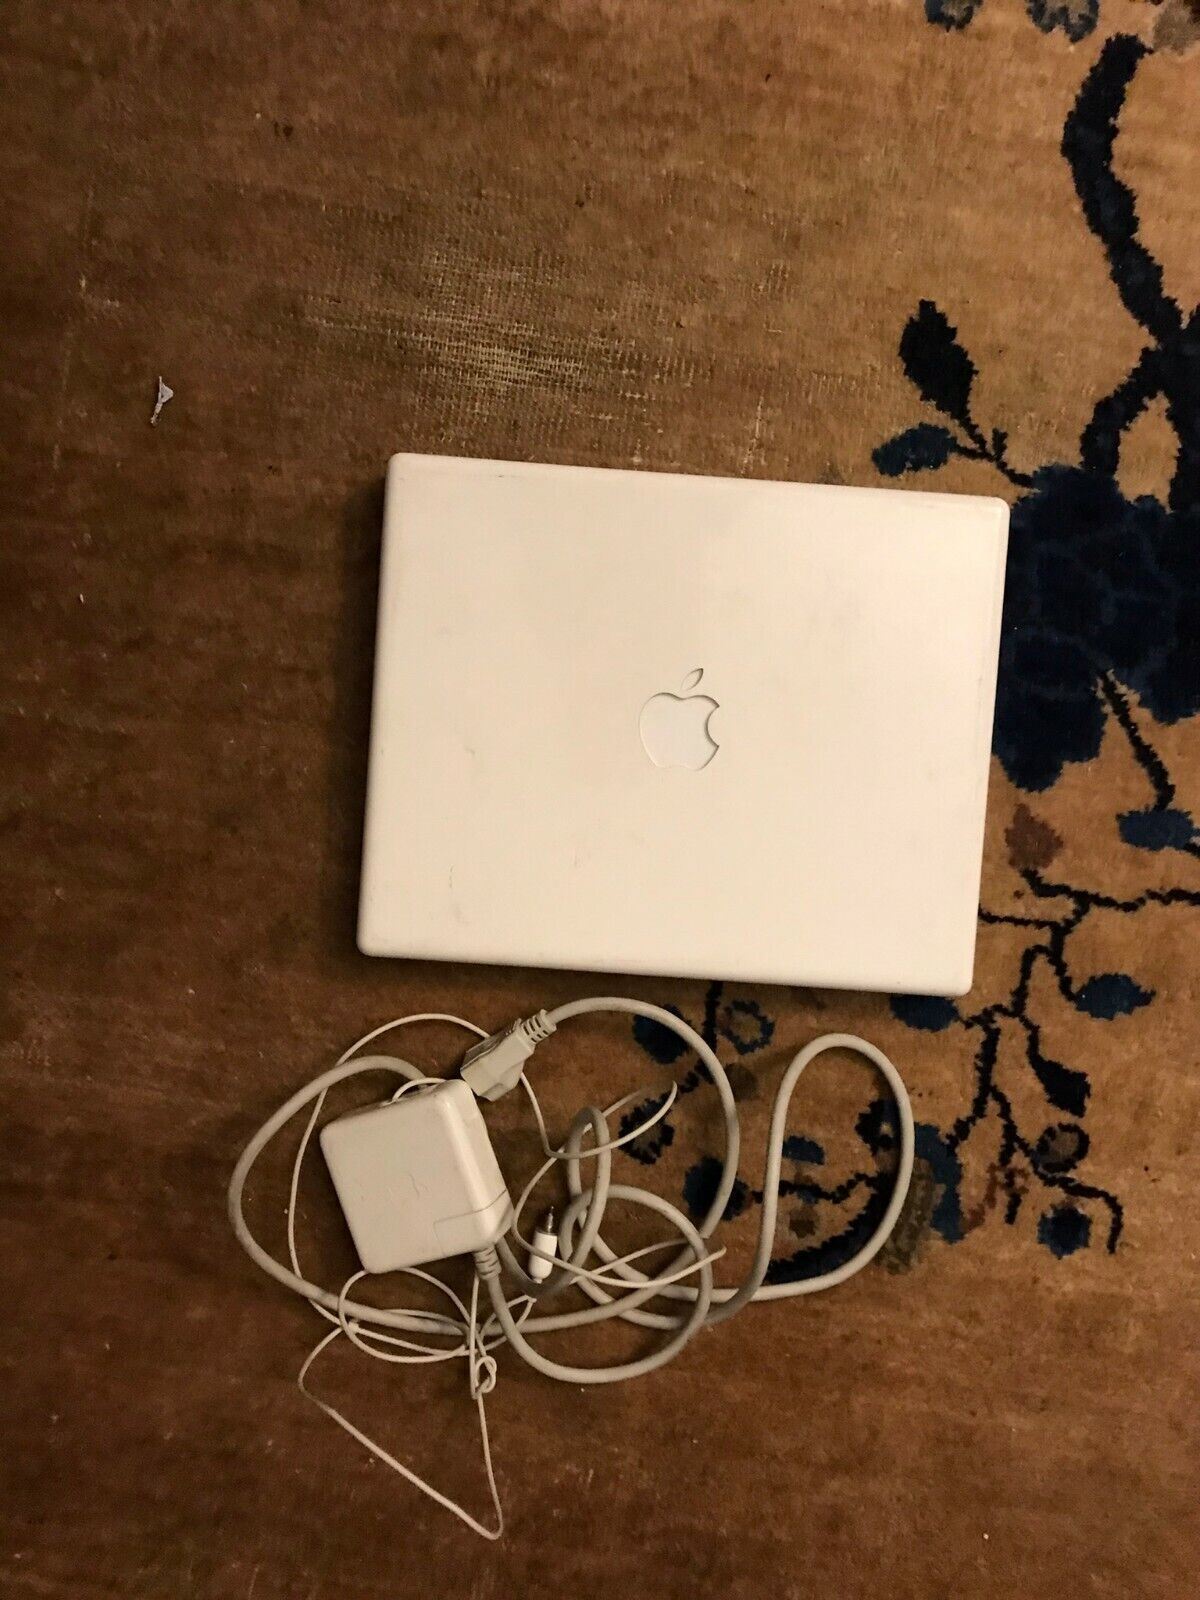 Apple iBook G4 Laptop A1054 (2003) as is ***Read